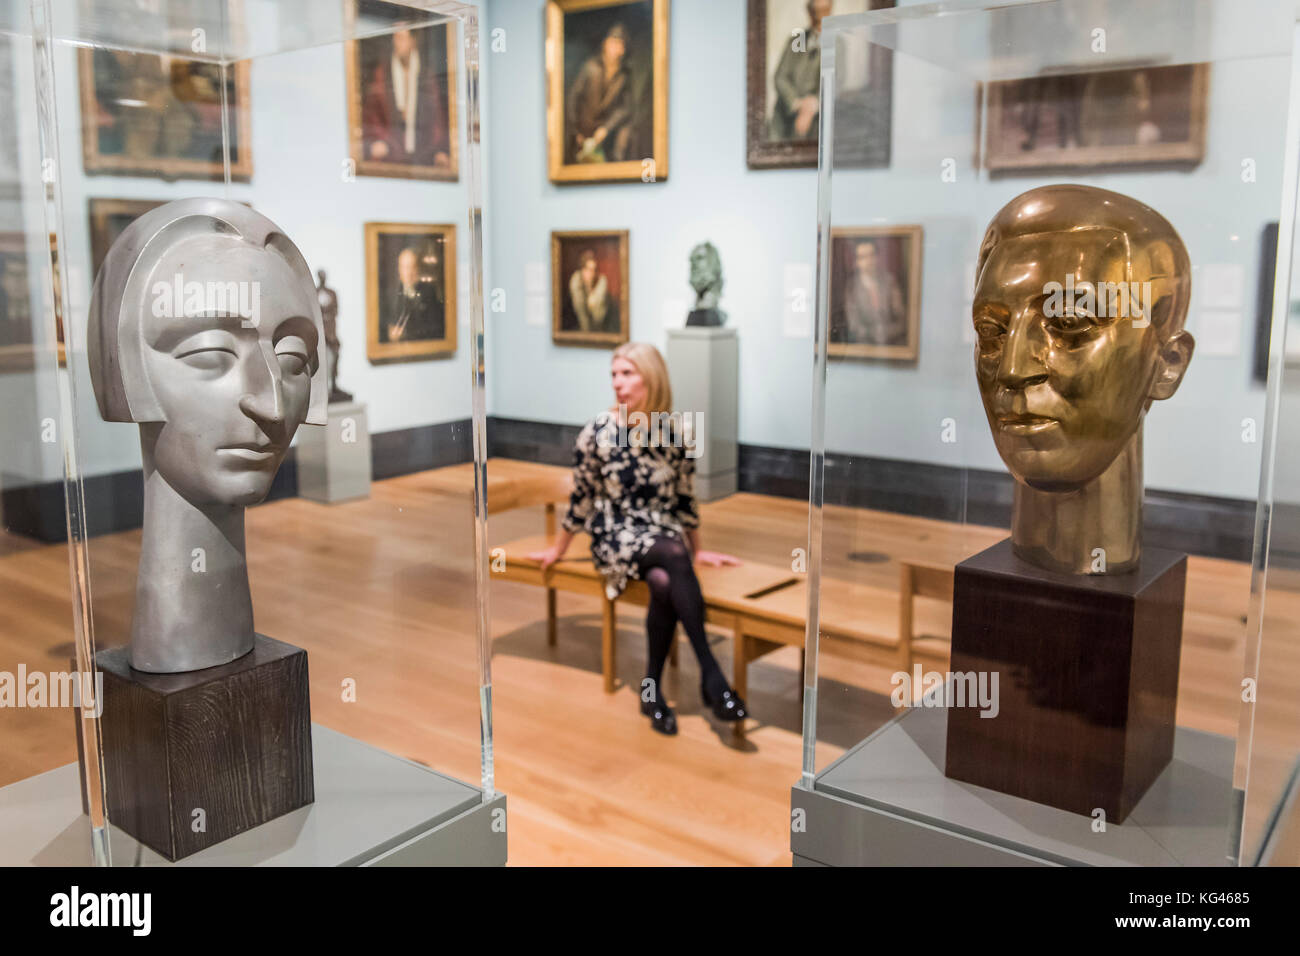 London, UK. 3rd November, 2017. Dame Edith Sitwell, by Maurice Lambert, and Sir Osbert Sitwell, by Frank Dobson, and other works - The National Portrait Gallery, London opens brand new gallery spaces devoted to its early 20th Century Collection on 4 November 2017. The creation of these new spaces within the Gallery's free permanent Collection, has been made possible by a grant from the DCMS/ Wolfson Museums & Galleries Improvement Fund. London 03 Nov 2017. Credit: Guy Bell/Alamy Live News Stock Photo